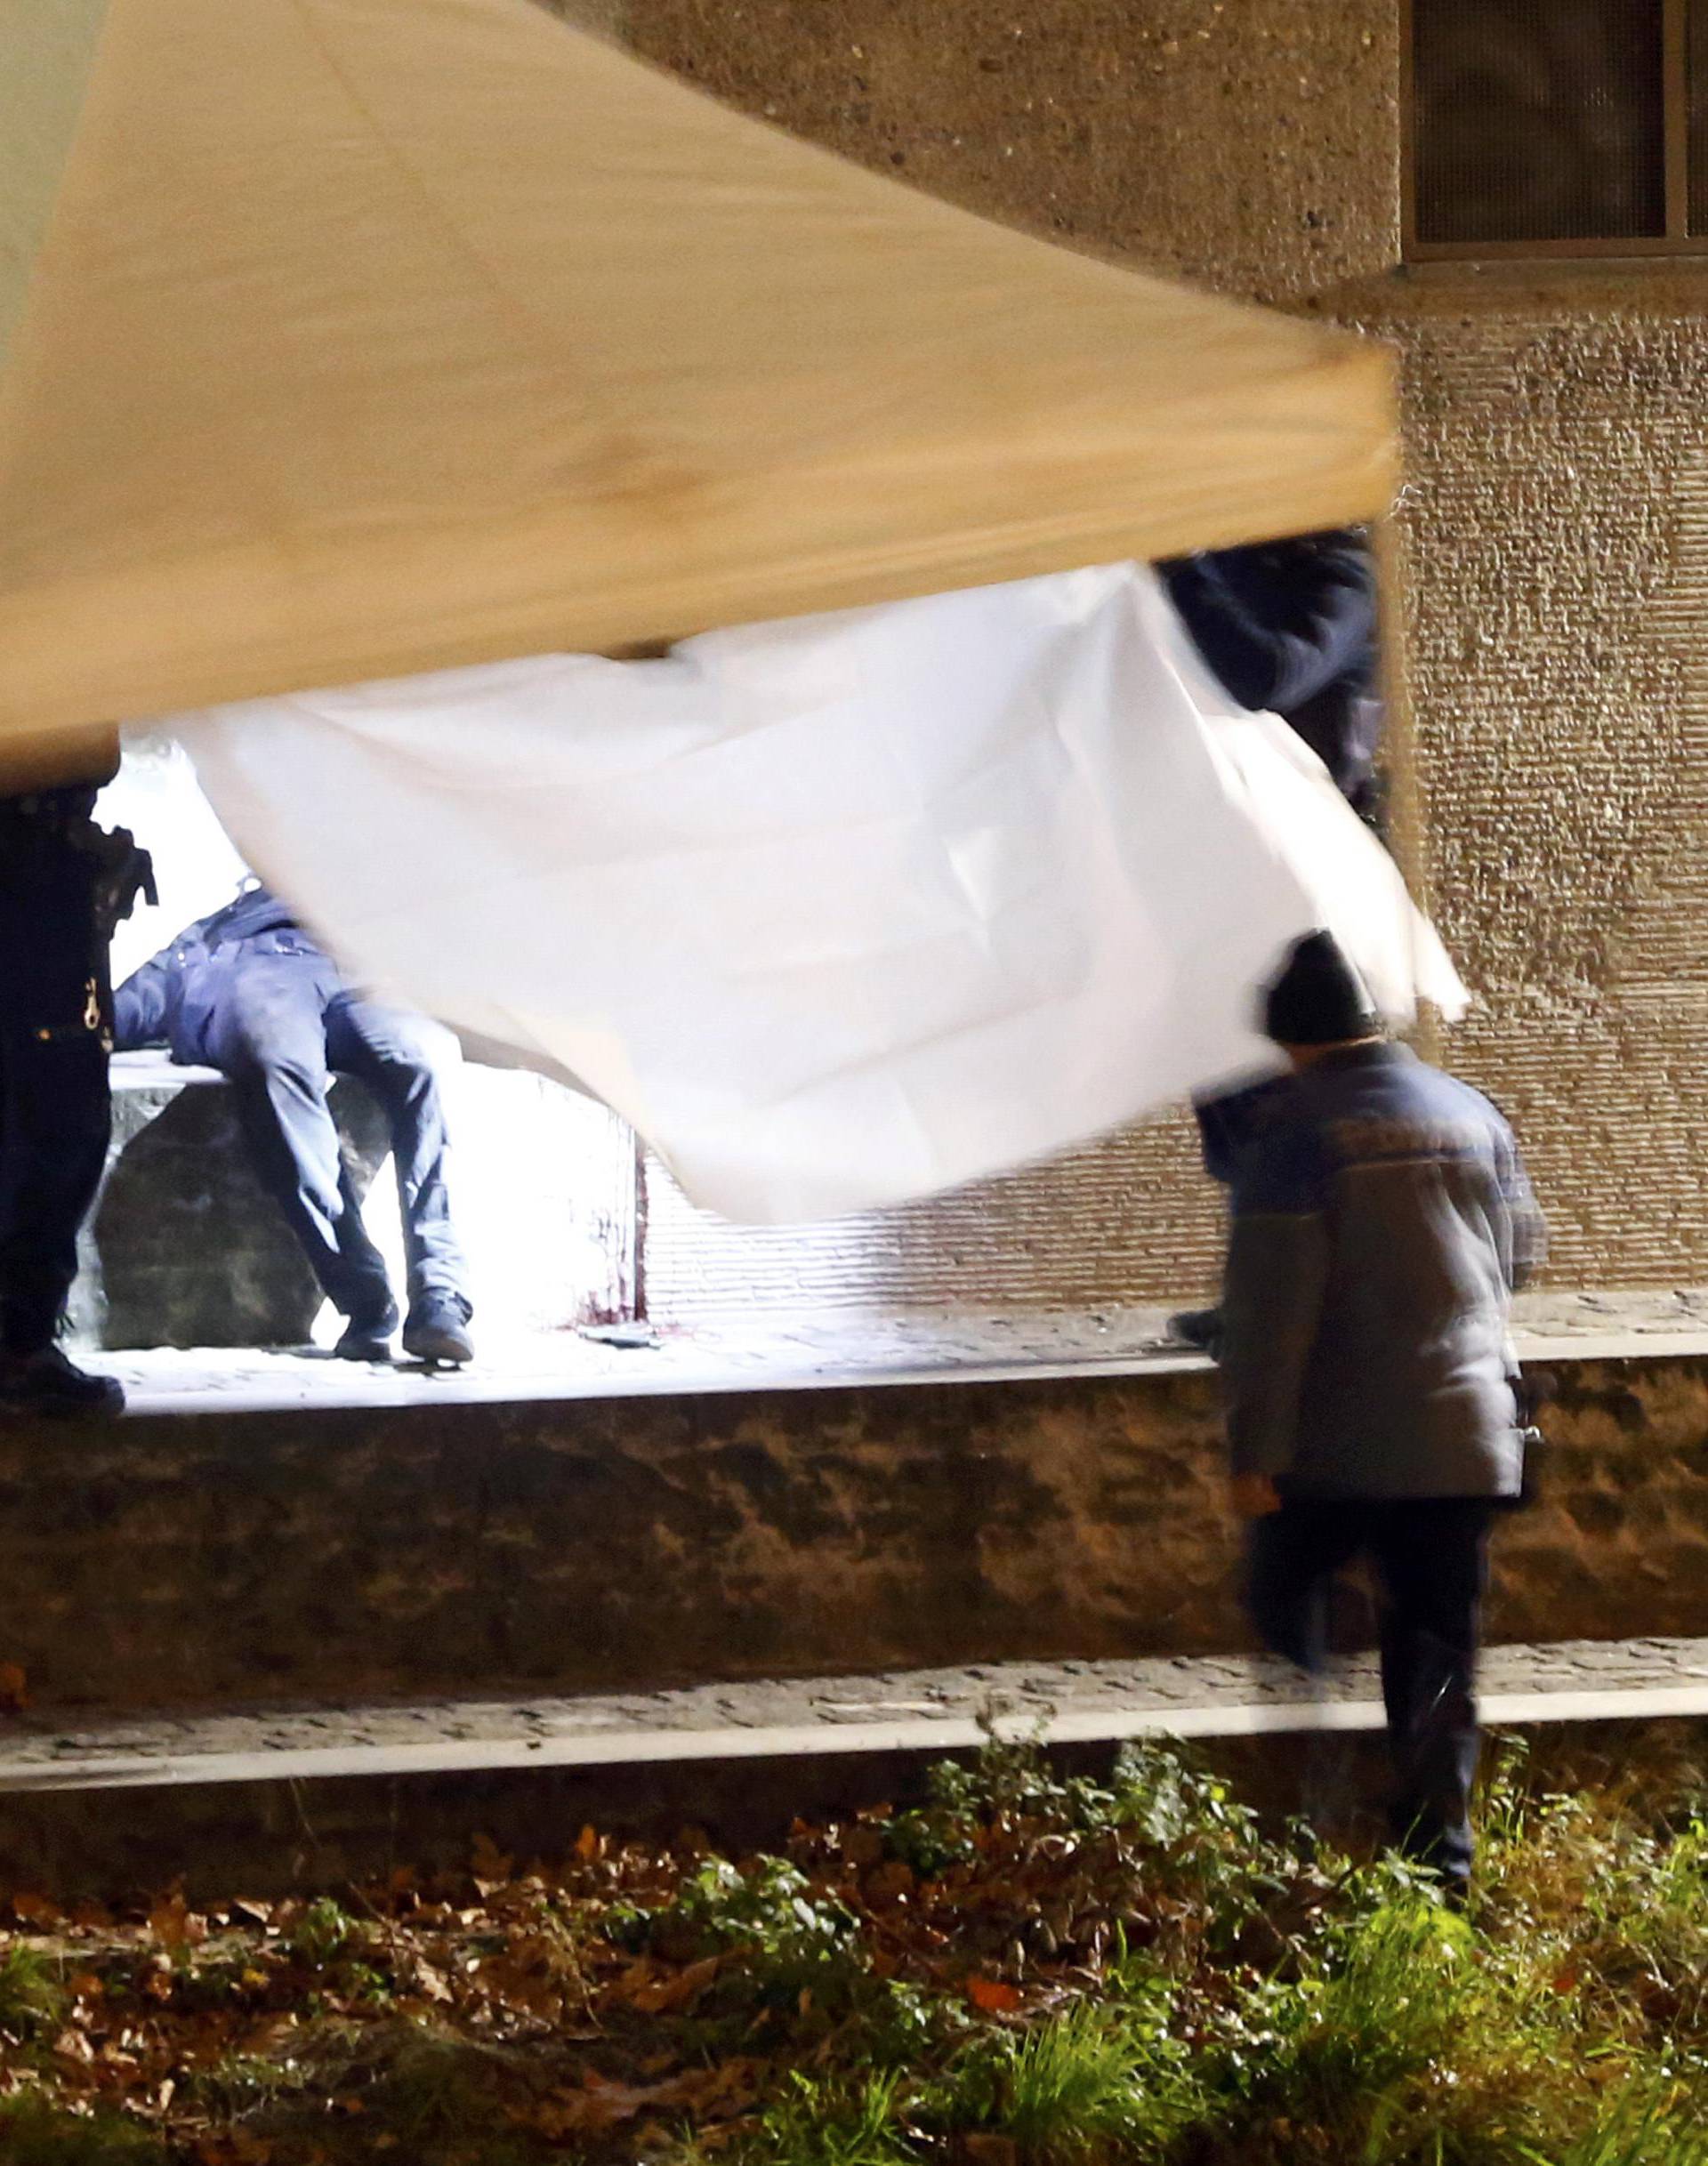 Police cover a body after a shooting outside an Islamic center in central Zurich